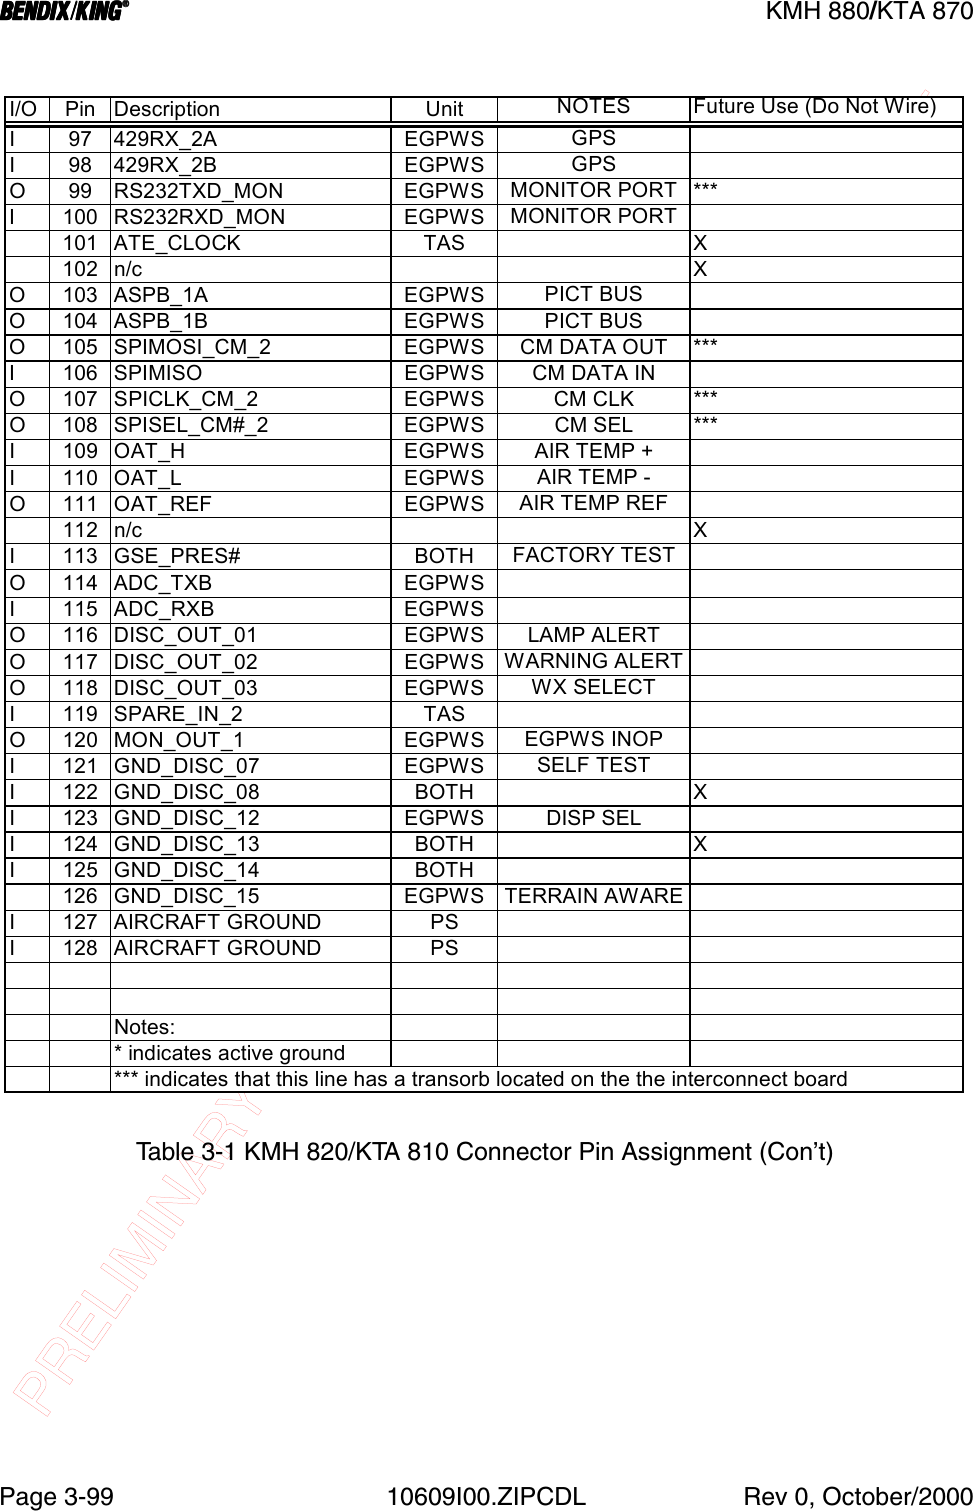 PRELIMINARY - SUBJECT TO CHANGE WITHOUT NOTICEBBBB KMH 880/KTA 870Page 3-99 10609I00.ZIPCDL Rev 0, October/2000Table 3-1 KMH 820/KTA 810 Connector Pin Assignment (Con’t)I/O Pin Description Unit NOTES Future Use (Do Not Wire)I 97 429RX_2A EGPWS GPSI 98 429RX_2B EGPWS GPSO 99 RS232TXD_MON EGPWS MONITOR PORT ***I 100 RS232RXD_MON EGPWS MONITOR PORT101 ATE_CLOCK TAS X102 n/c  XO 103 ASPB_1A EGPWS PICT BUSO 104 ASPB_1B EGPWS PICT BUSO 105 SPIMOSI_CM_2 EGPWS CM DATA OUT ***I 106 SPIMISO EGPWS CM DATA INO 107 SPICLK_CM_2 EGPWS CM CLK ***O 108 SPISEL_CM#_2 EGPWS CM SEL ***I109OAT_H EGPWS AIR TEMP +I110OAT_L EGPWS AIR TEMP -O111OAT_REF EGPWSAIR TEMP REF112 n/c XI 113 GSE_PRES# BOTH FACTORY TESTO114ADC_TXB EGPWSI 115 ADC_RXB EGPWSO 116 DISC_OUT_01 EGPWS LAMP ALERTO 117 DISC_OUT_02 EGPWS WARNING ALERTO 118 DISC_OUT_03 EGPWS WX SELECTI 119 SPARE_IN_2 TASO120MON_OUT_1 EGPWS EGPWS INOPI 121 GND_DISC_07 EGPWS SELF TESTI 122 GND_DISC_08 BOTH XI 123 GND_DISC_12 EGPWS DISP SELI 124 GND_DISC_13 BOTH XI 125 GND_DISC_14 BOTH126 GND_DISC_15 EGPWS TERRAIN AWAREI 127 AIRCRAFT GROUND PSI 128 AIRCRAFT GROUND PSNotes:* indicates active ground*** indicates that this line has a transorb located on the the interconnect board